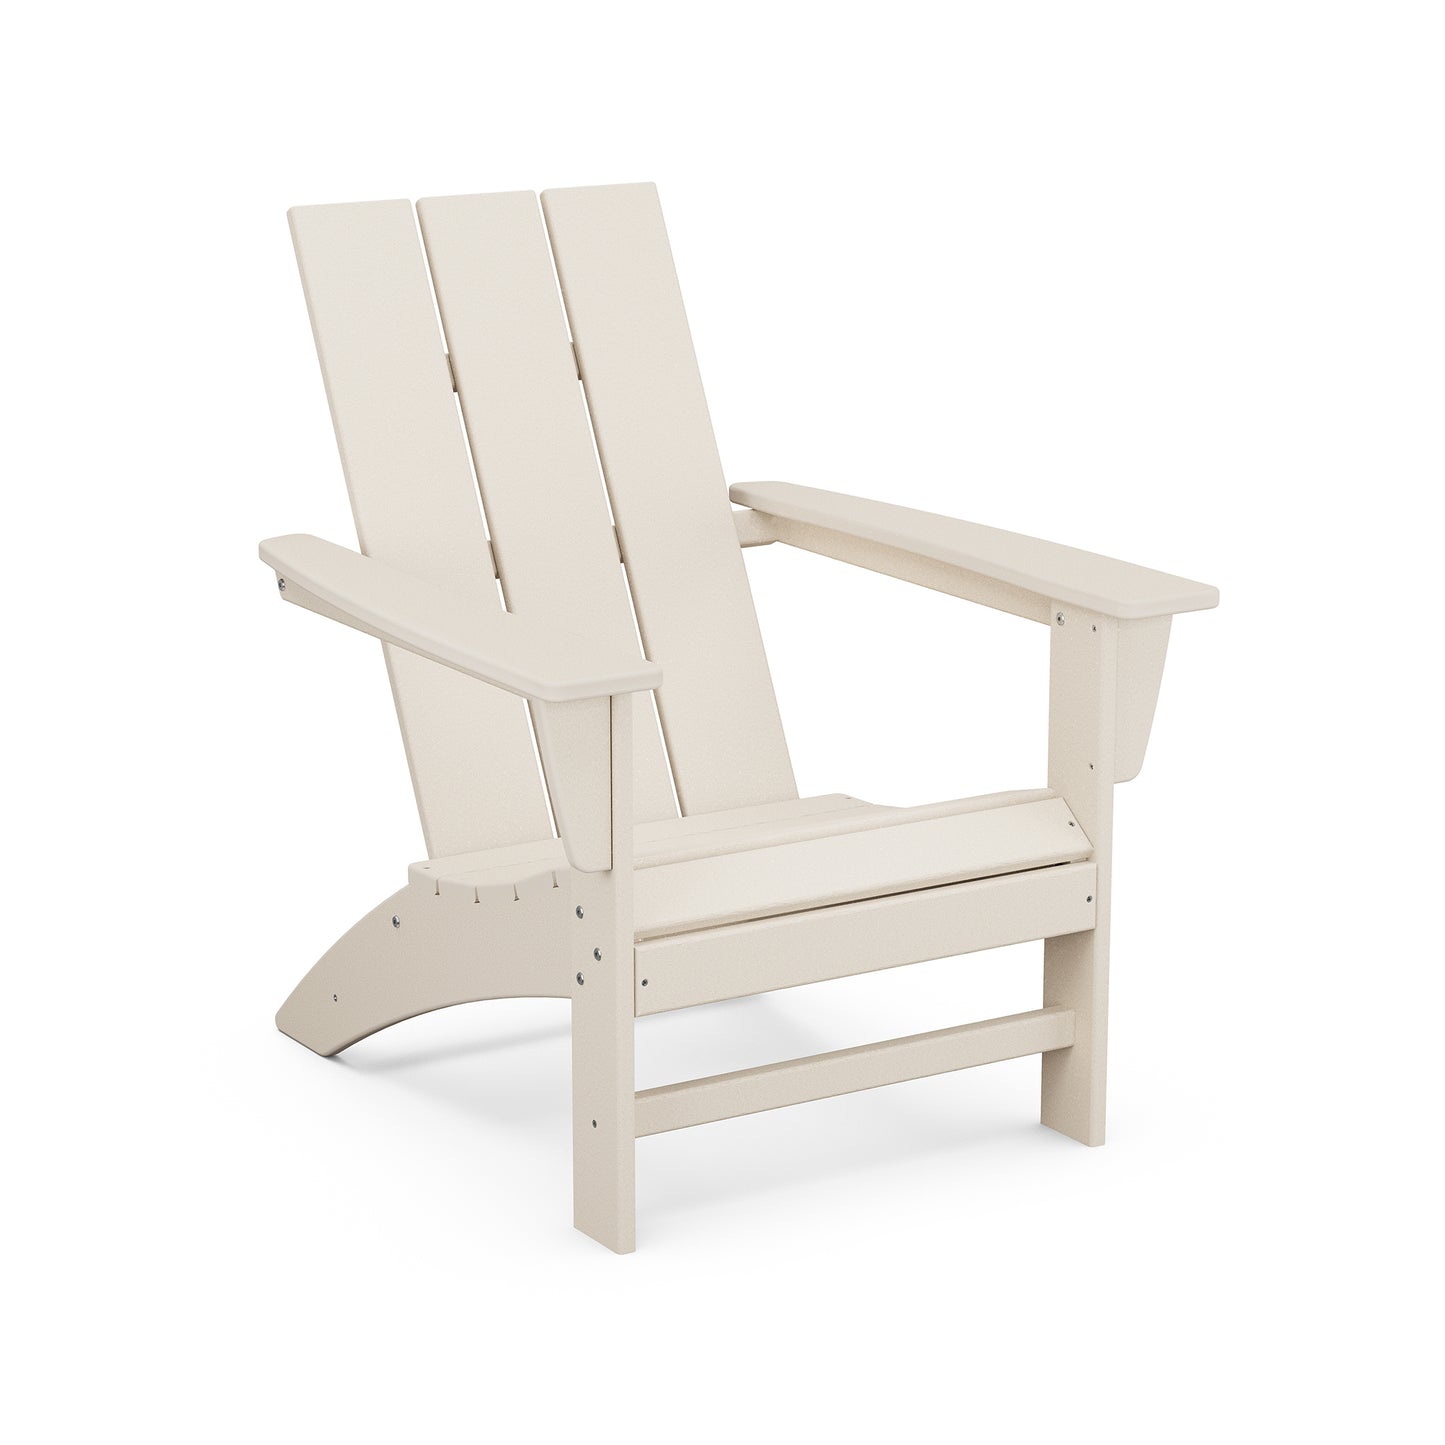 A single beige POLYWOOD Modern Adirondack chair made of POLYWOOD® lumber, shown in an isolated white background. The chair features a slanted back and broad armrests.